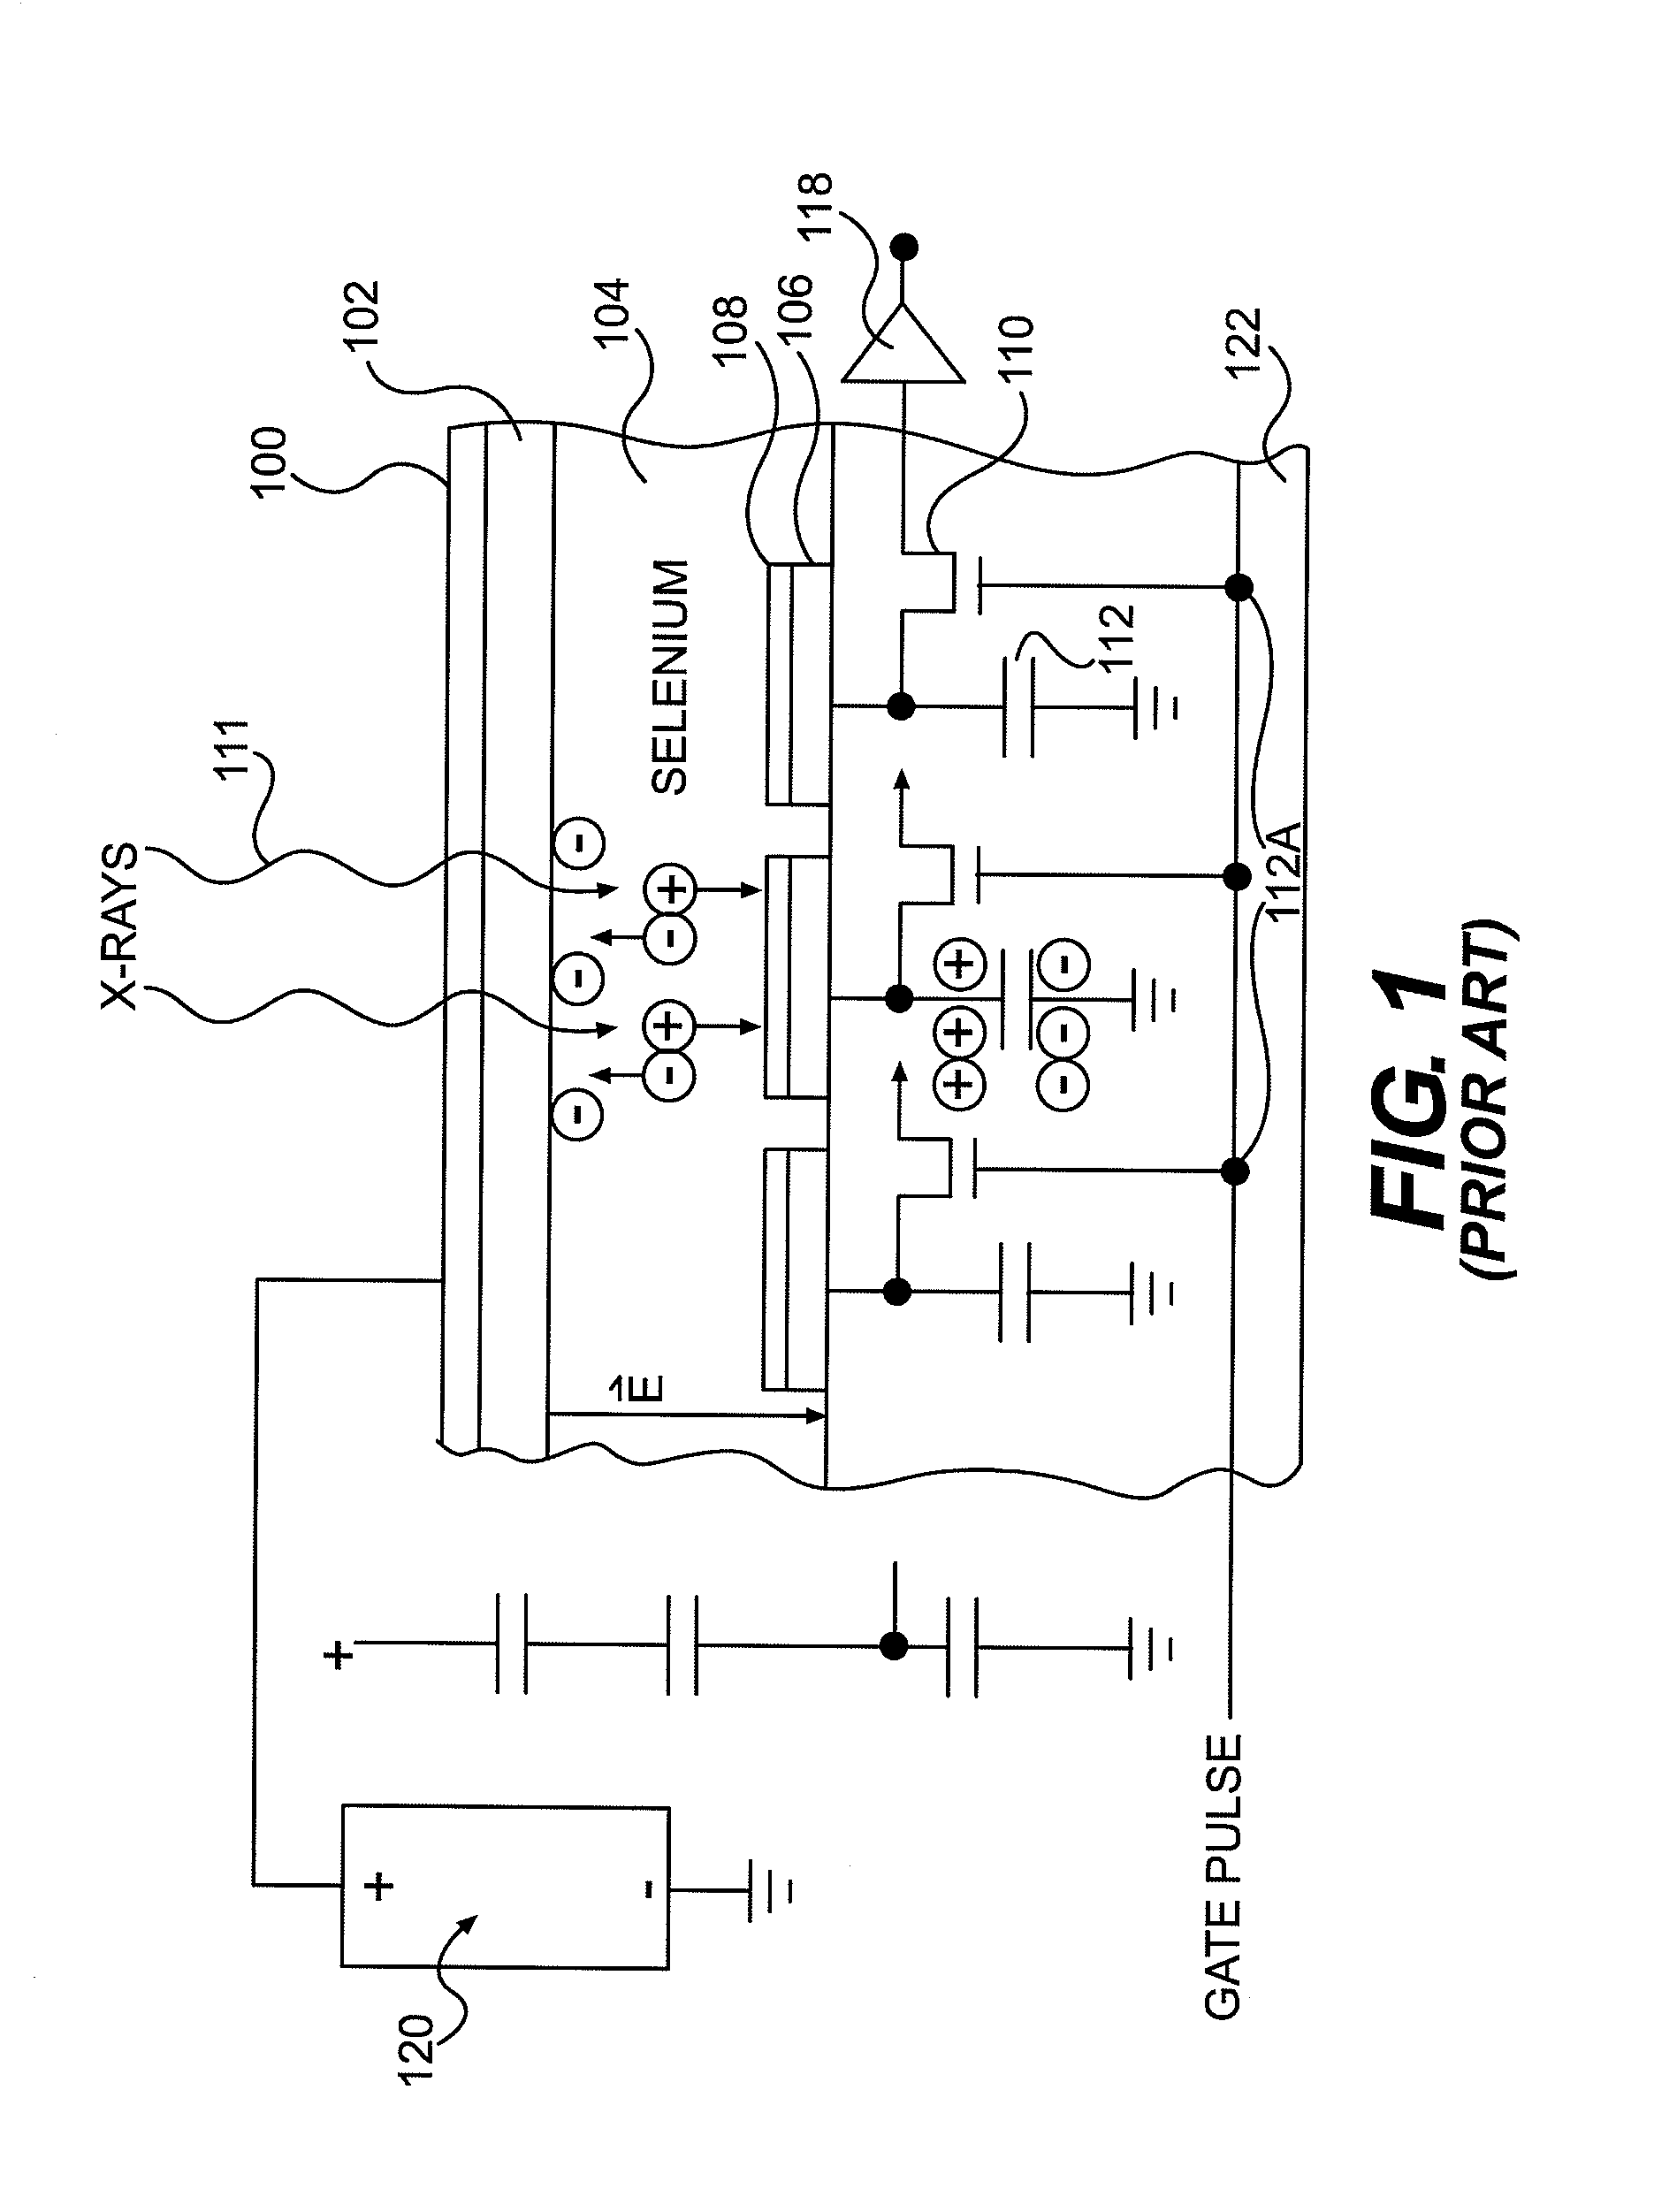 Direct Conversion X-Ray Imaging Device With Strip Electrodes